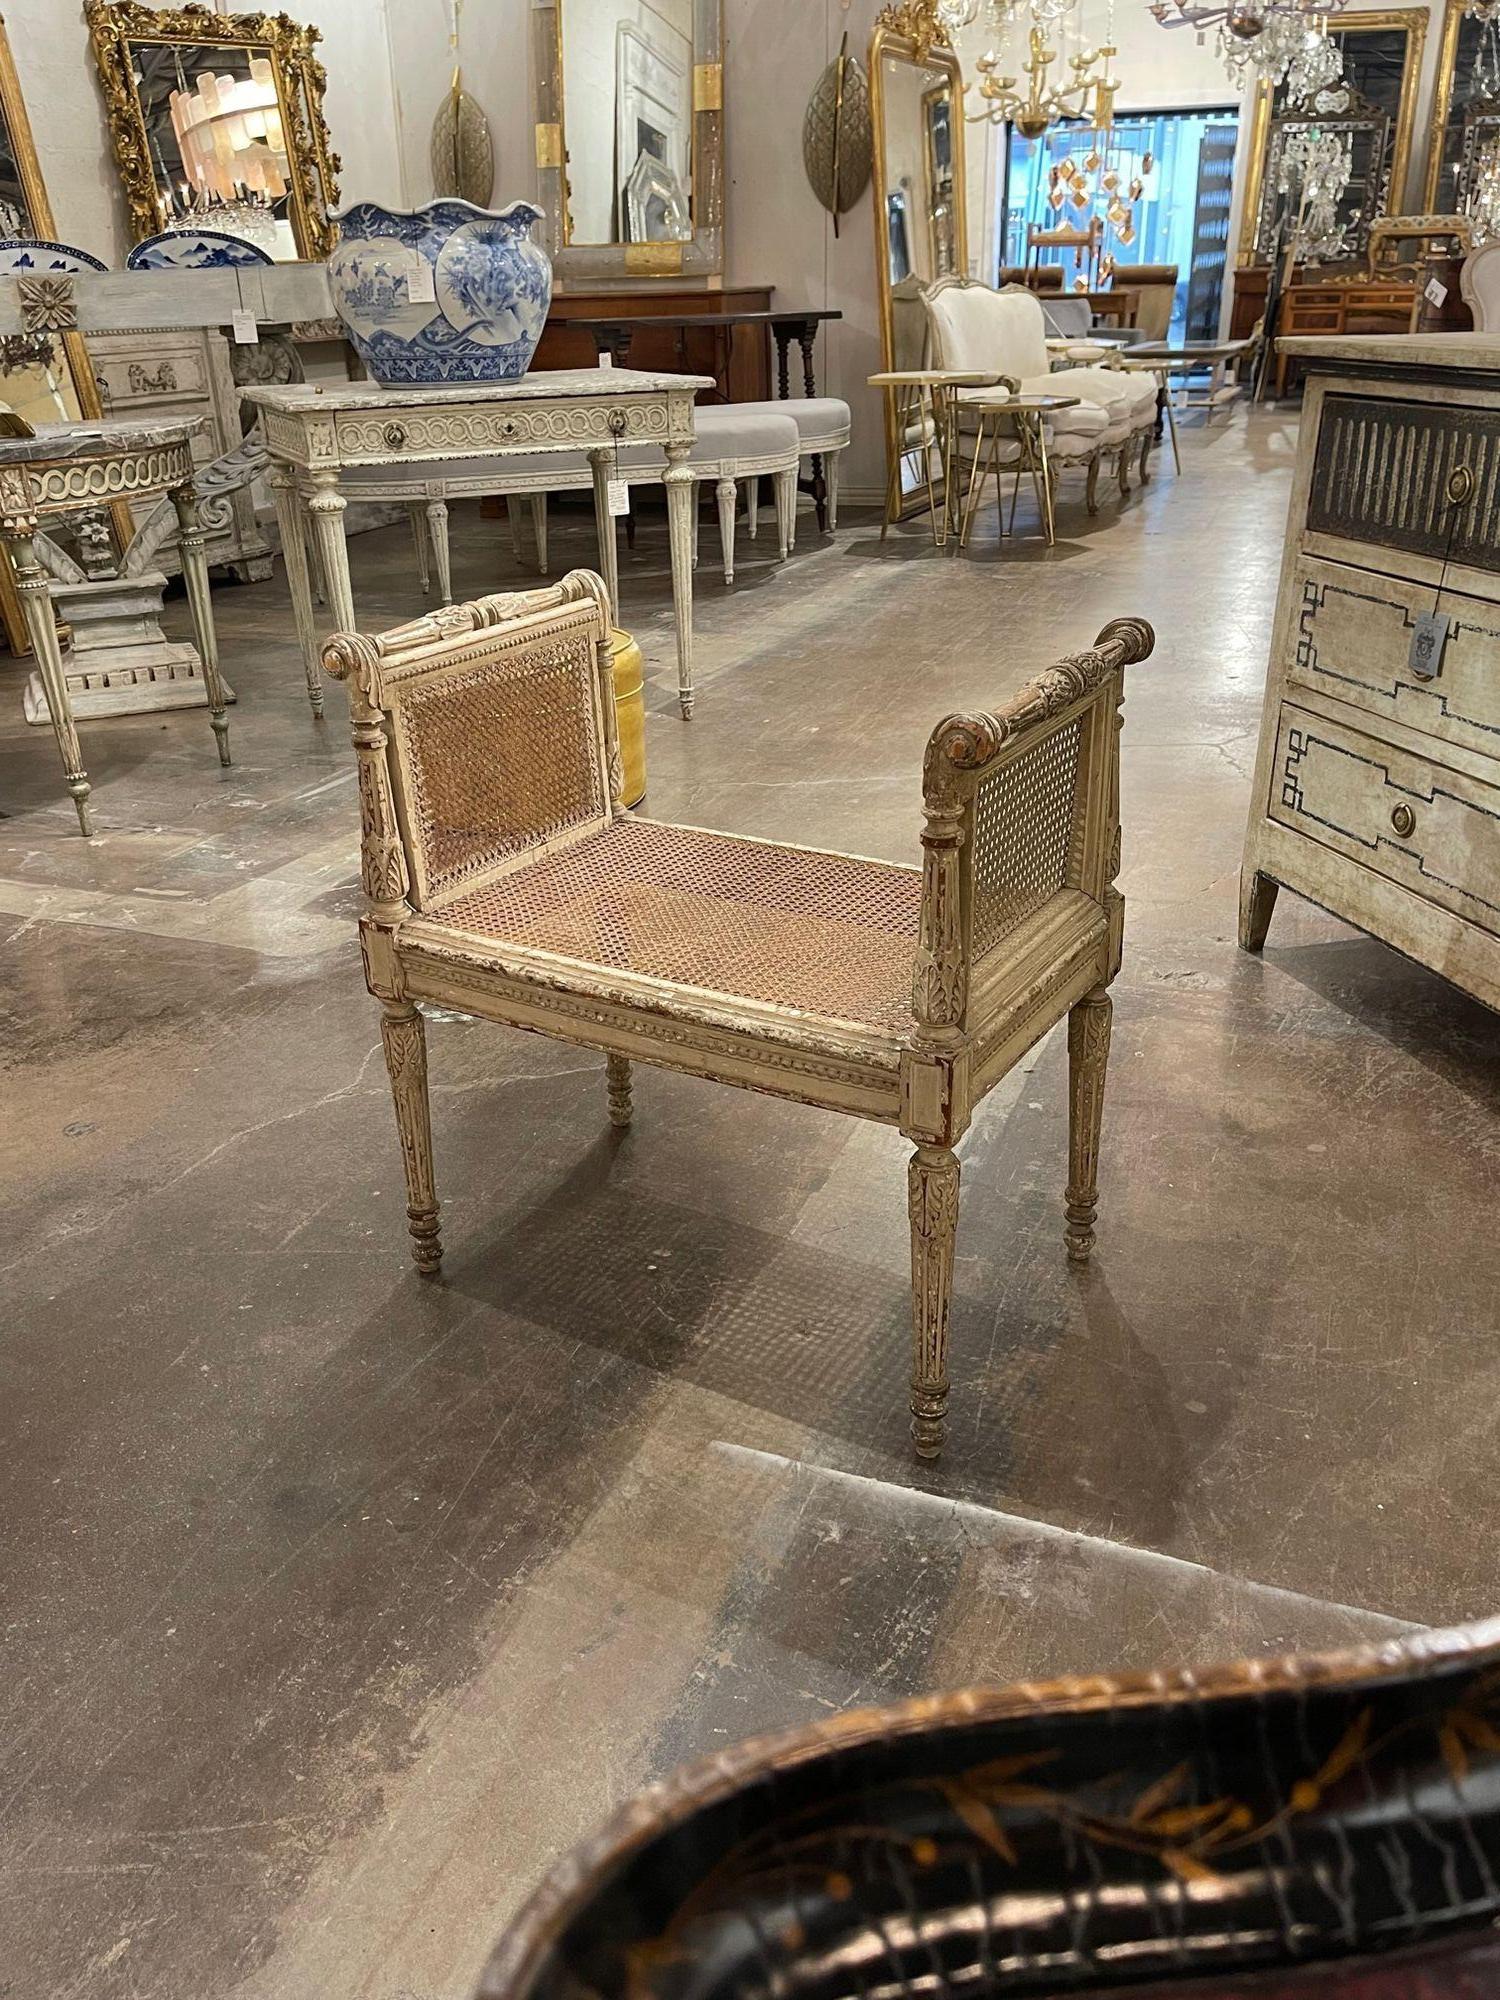 Beautiful 19th century French Louis XVI style carved and painted vanity stool. Featuring nice carvings, a beautiful patina and a caned sides and seat. A classic look that adds a real touch of charm!